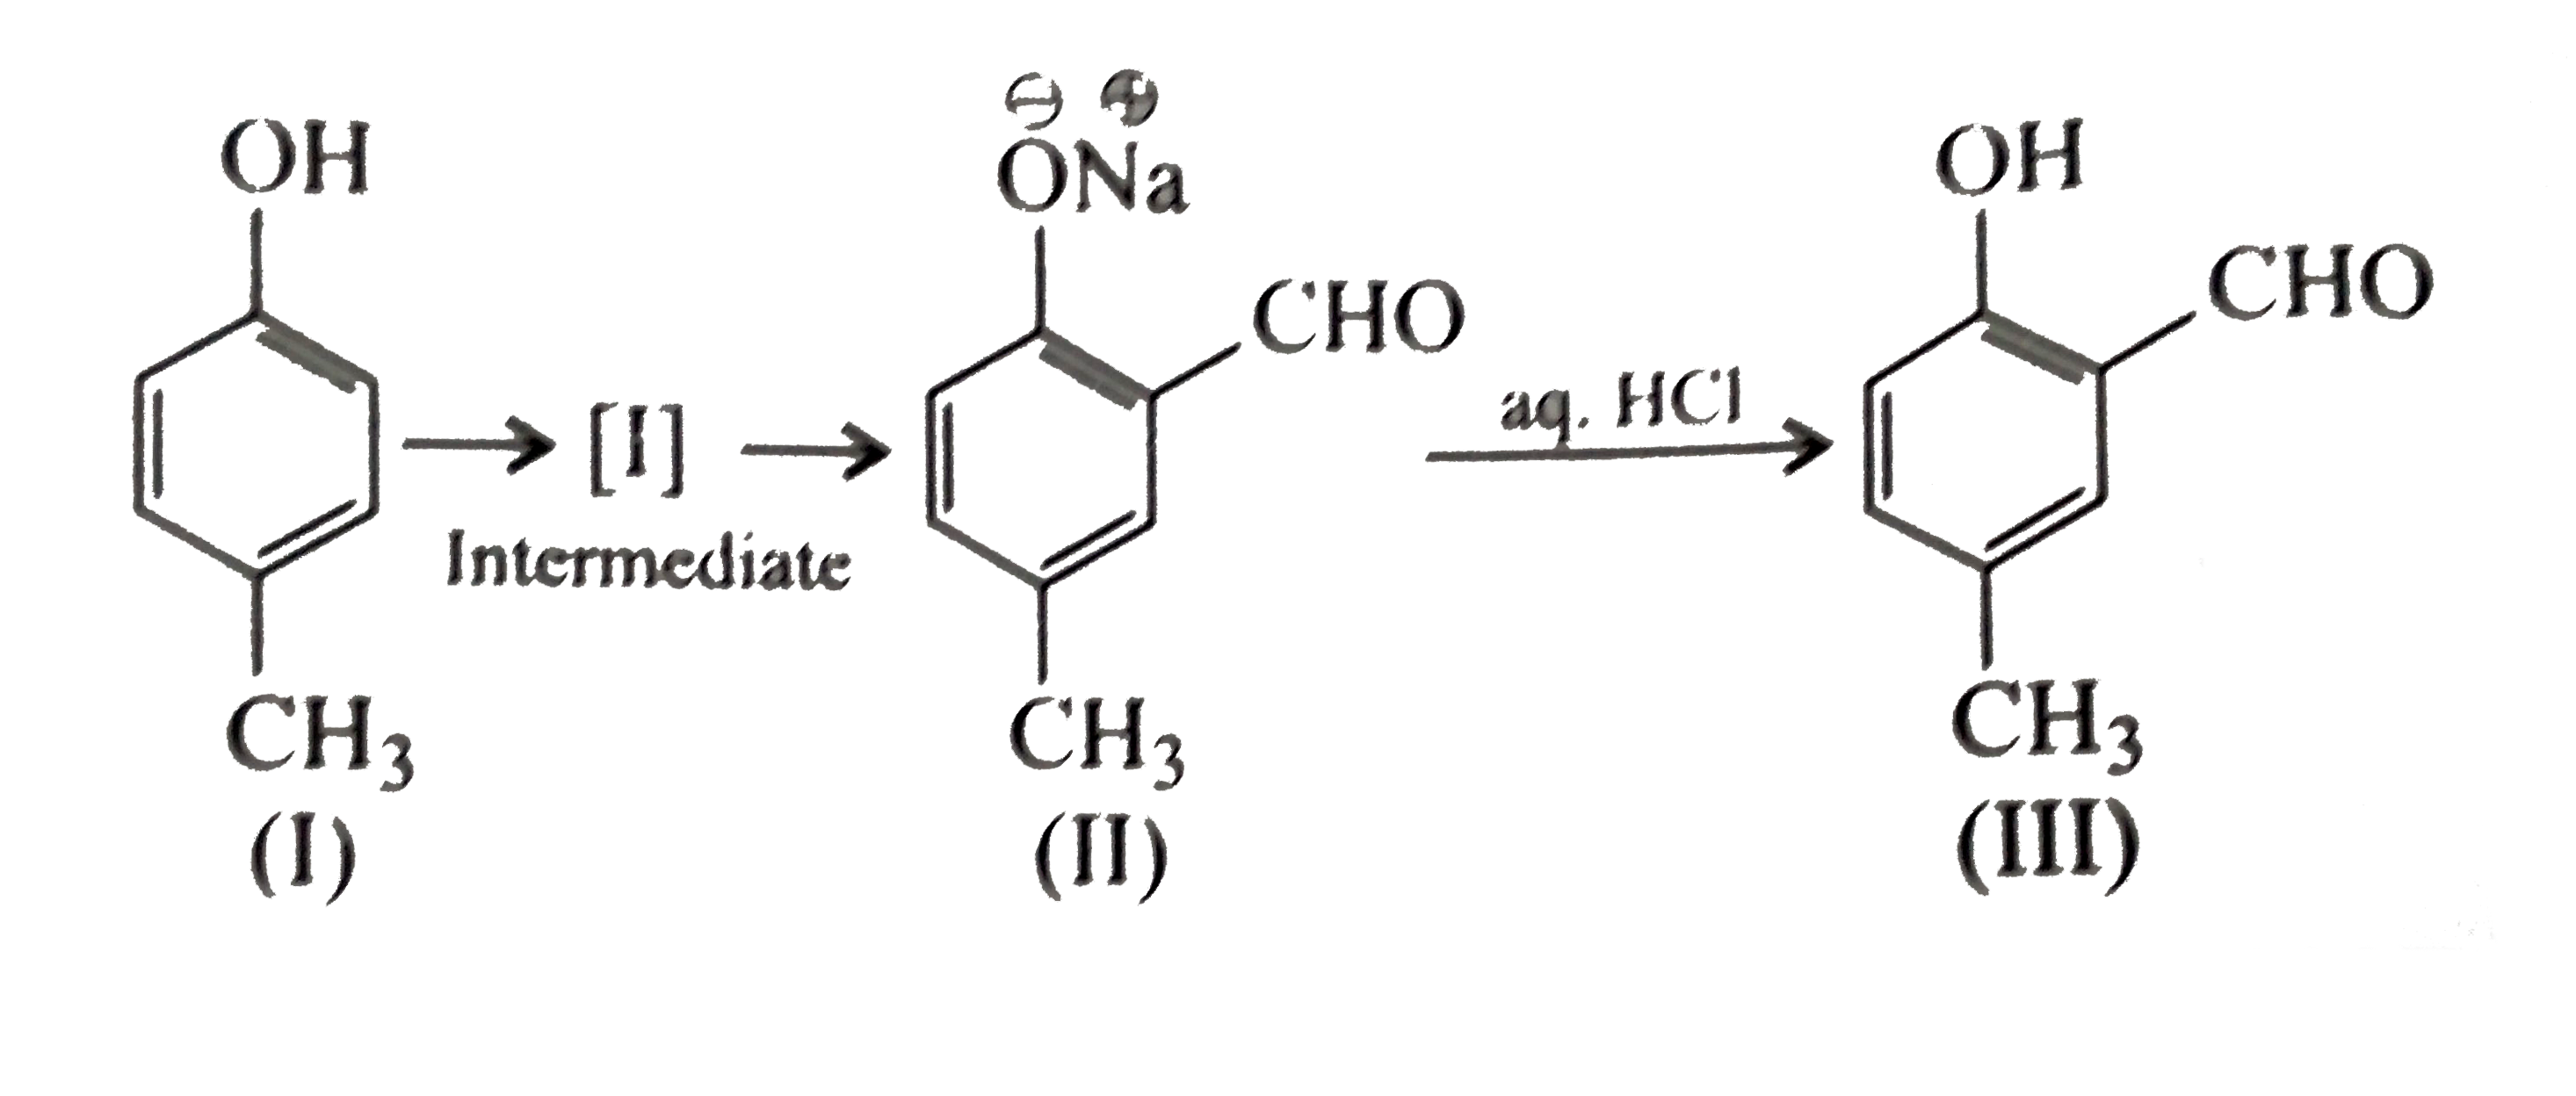 Reimer-Tiemann reaction introduces an aldehyde group on to the aromatic ring of phenol, ortho to the hydroxyl group. This reacrtion involves electrophilic aromatic subsititution. It is a general method for the synthesis of subsituted salicyladehydes as depiced below:      Which one of the following reagents is used in the above reaction ?